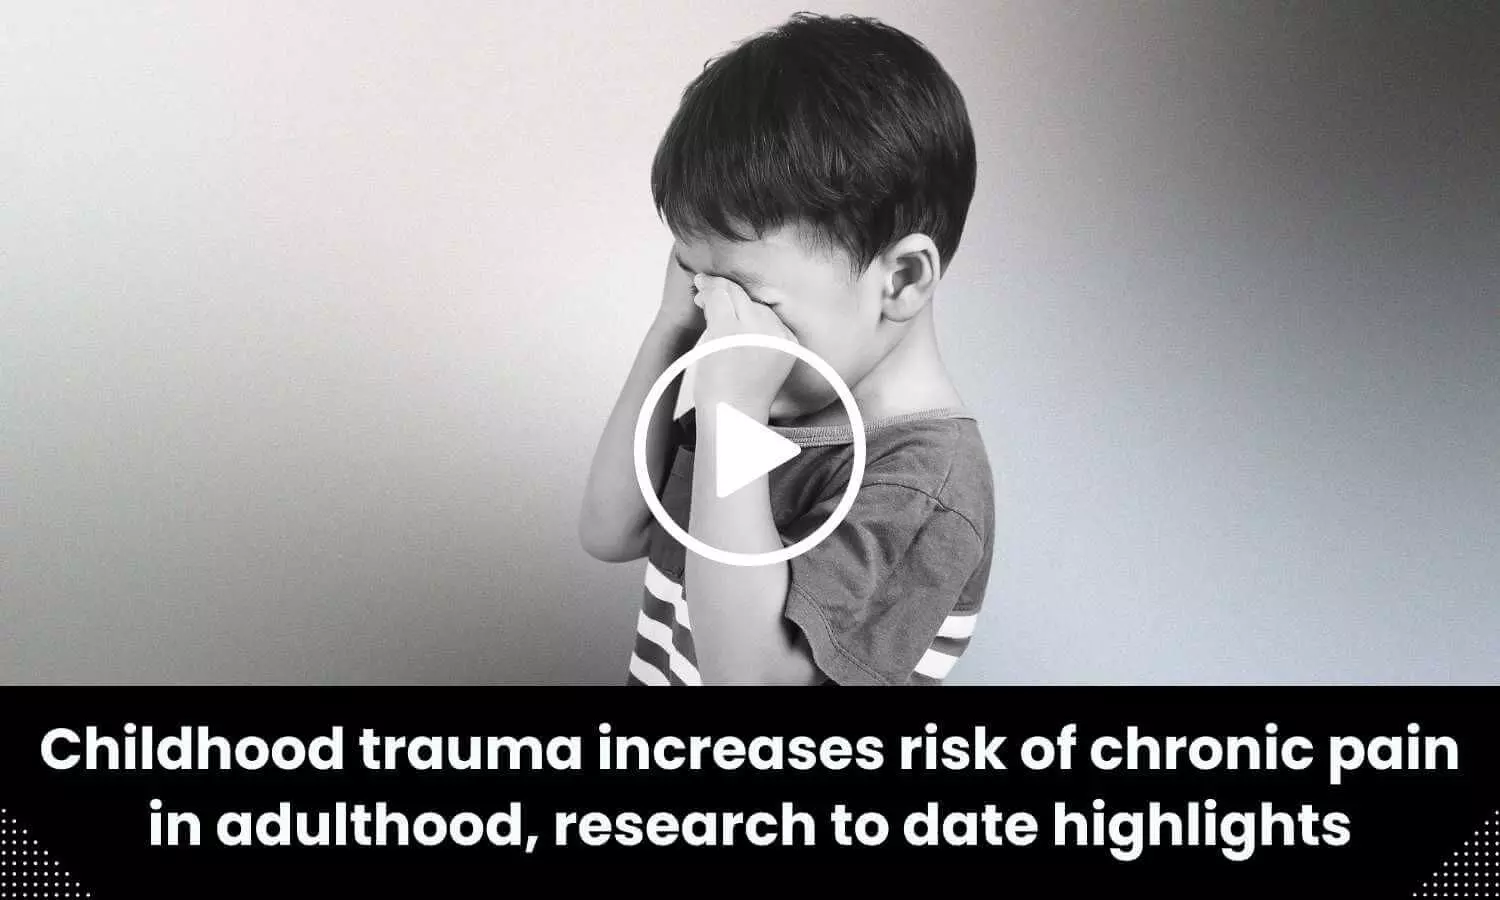 Childhood trauma increases risk of chronic pain in adulthood, research to date highlights